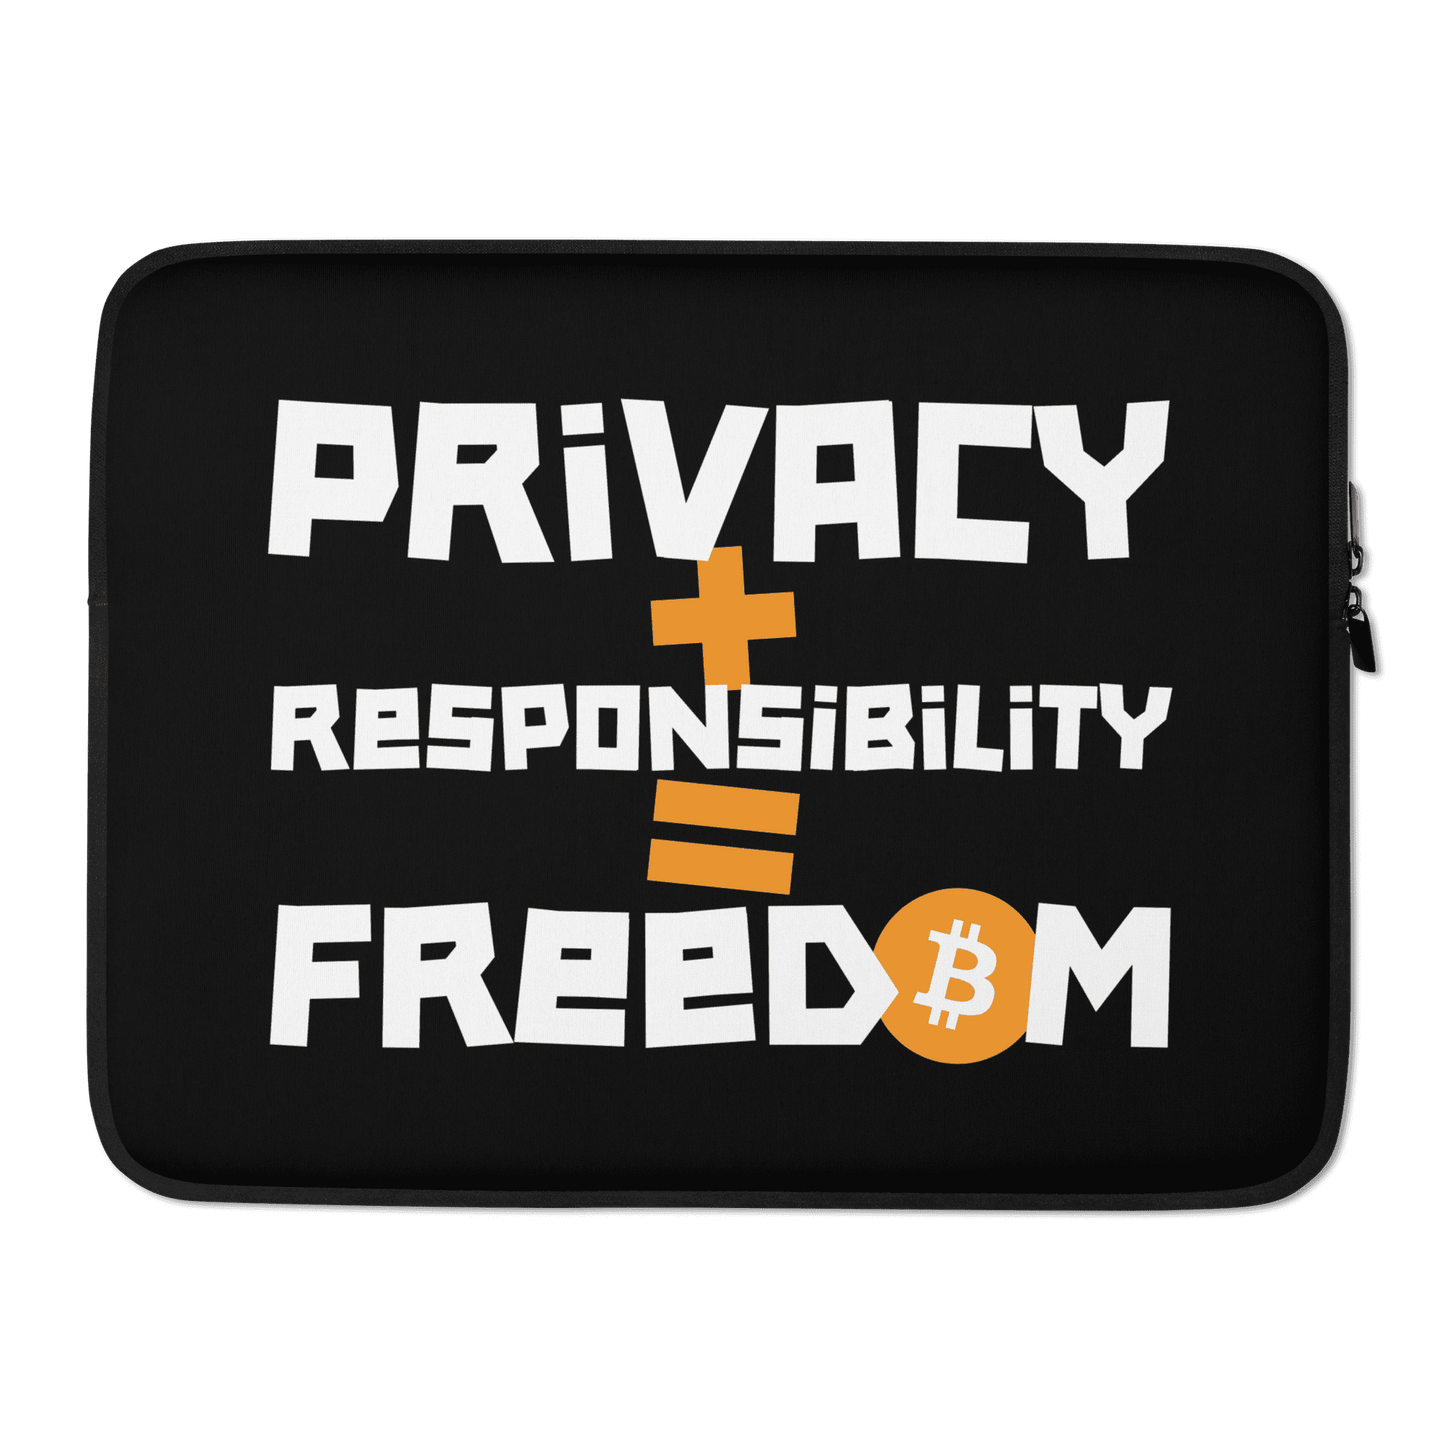 Privacy + Responsibility = Freedom Laptop Sleeve